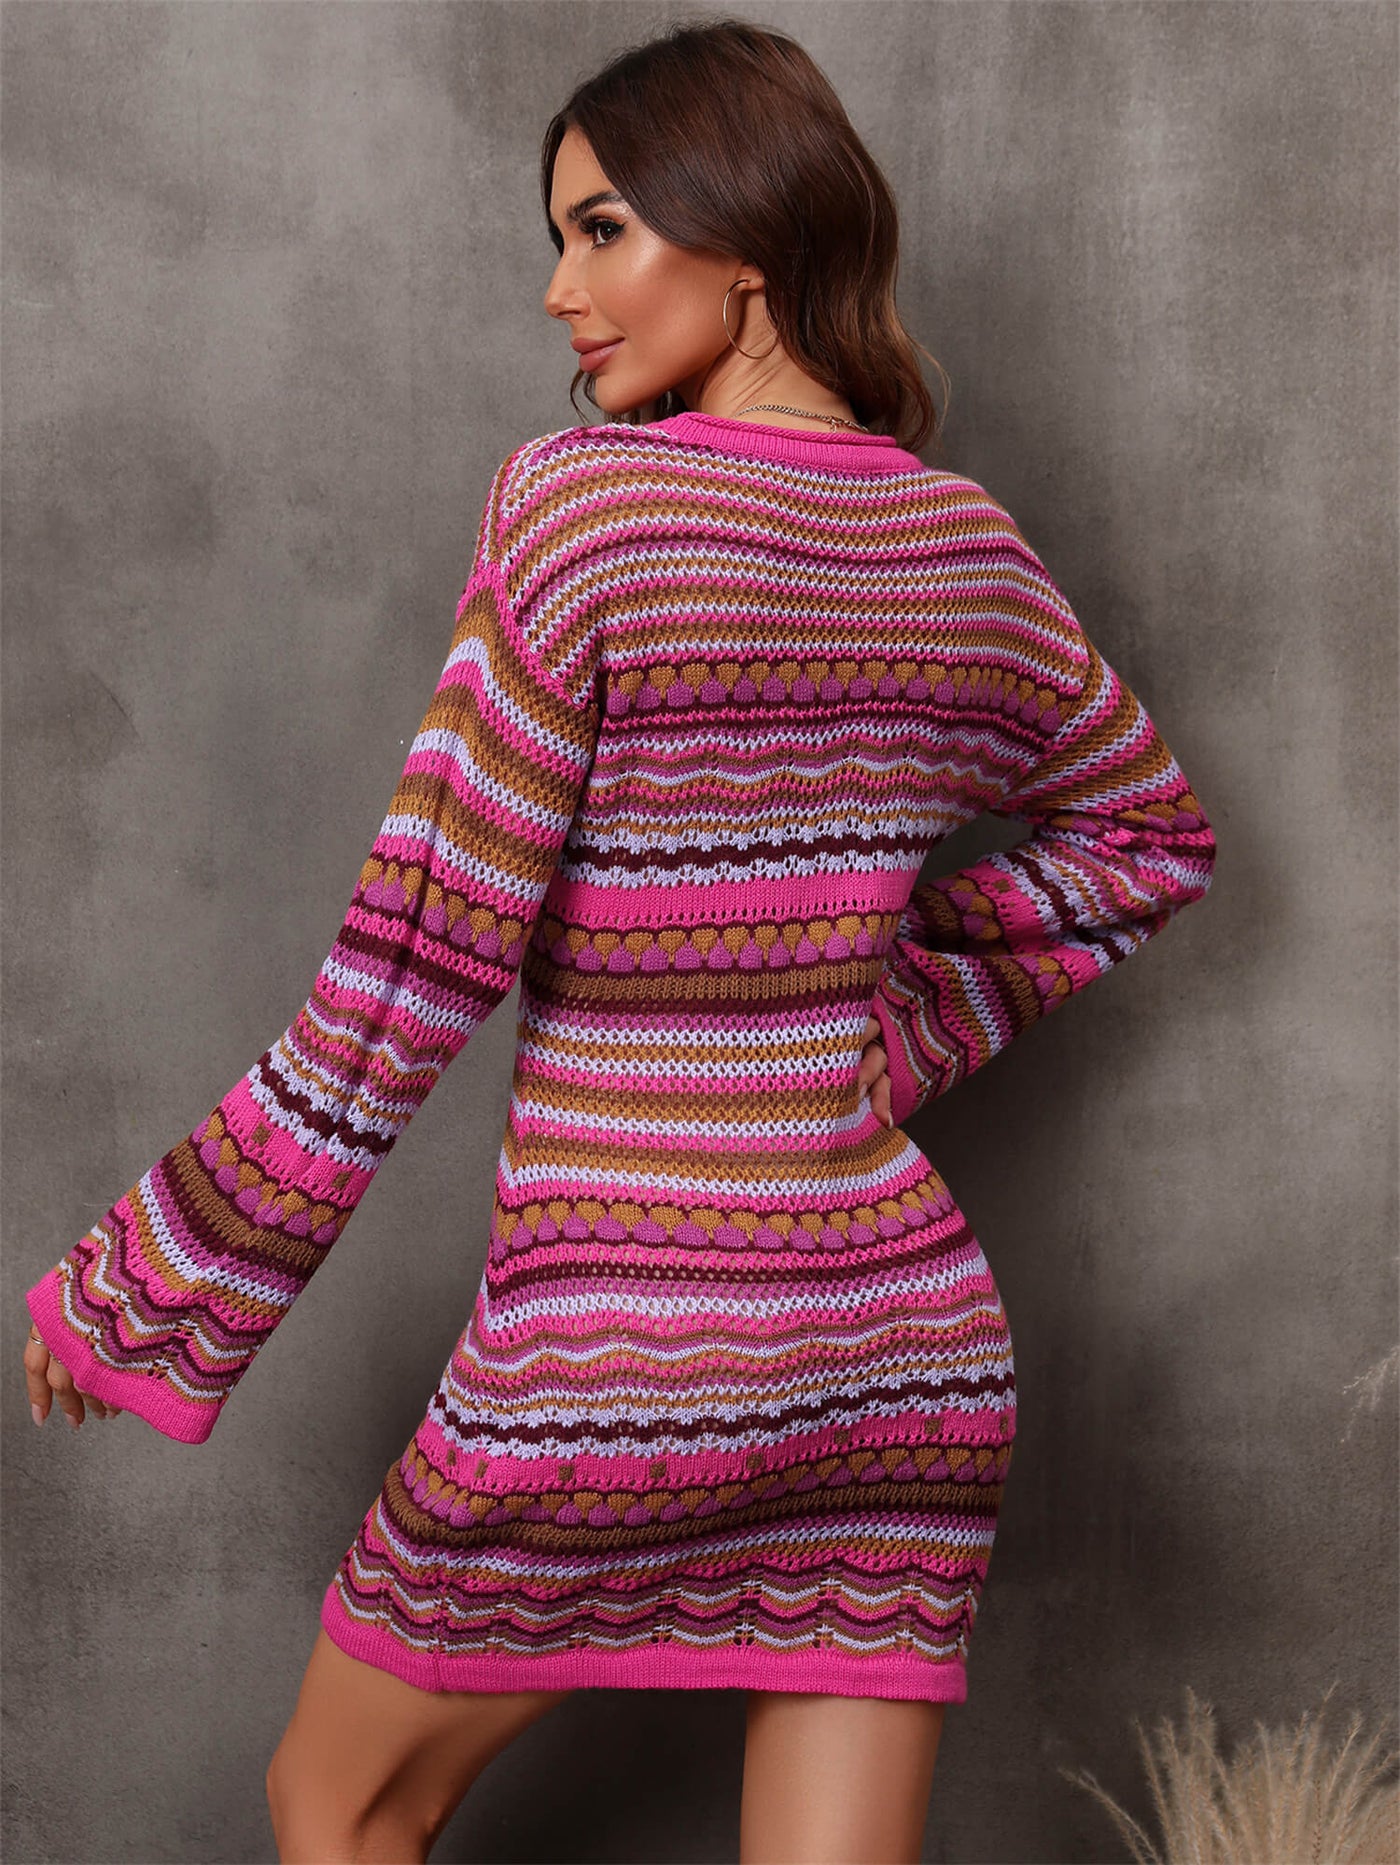 Multicolored Stripe Dropped Shoulder Sweater Dress  | KIKI COUTURE-Women's Clothing, Designer Fashions, Shoes, Bags